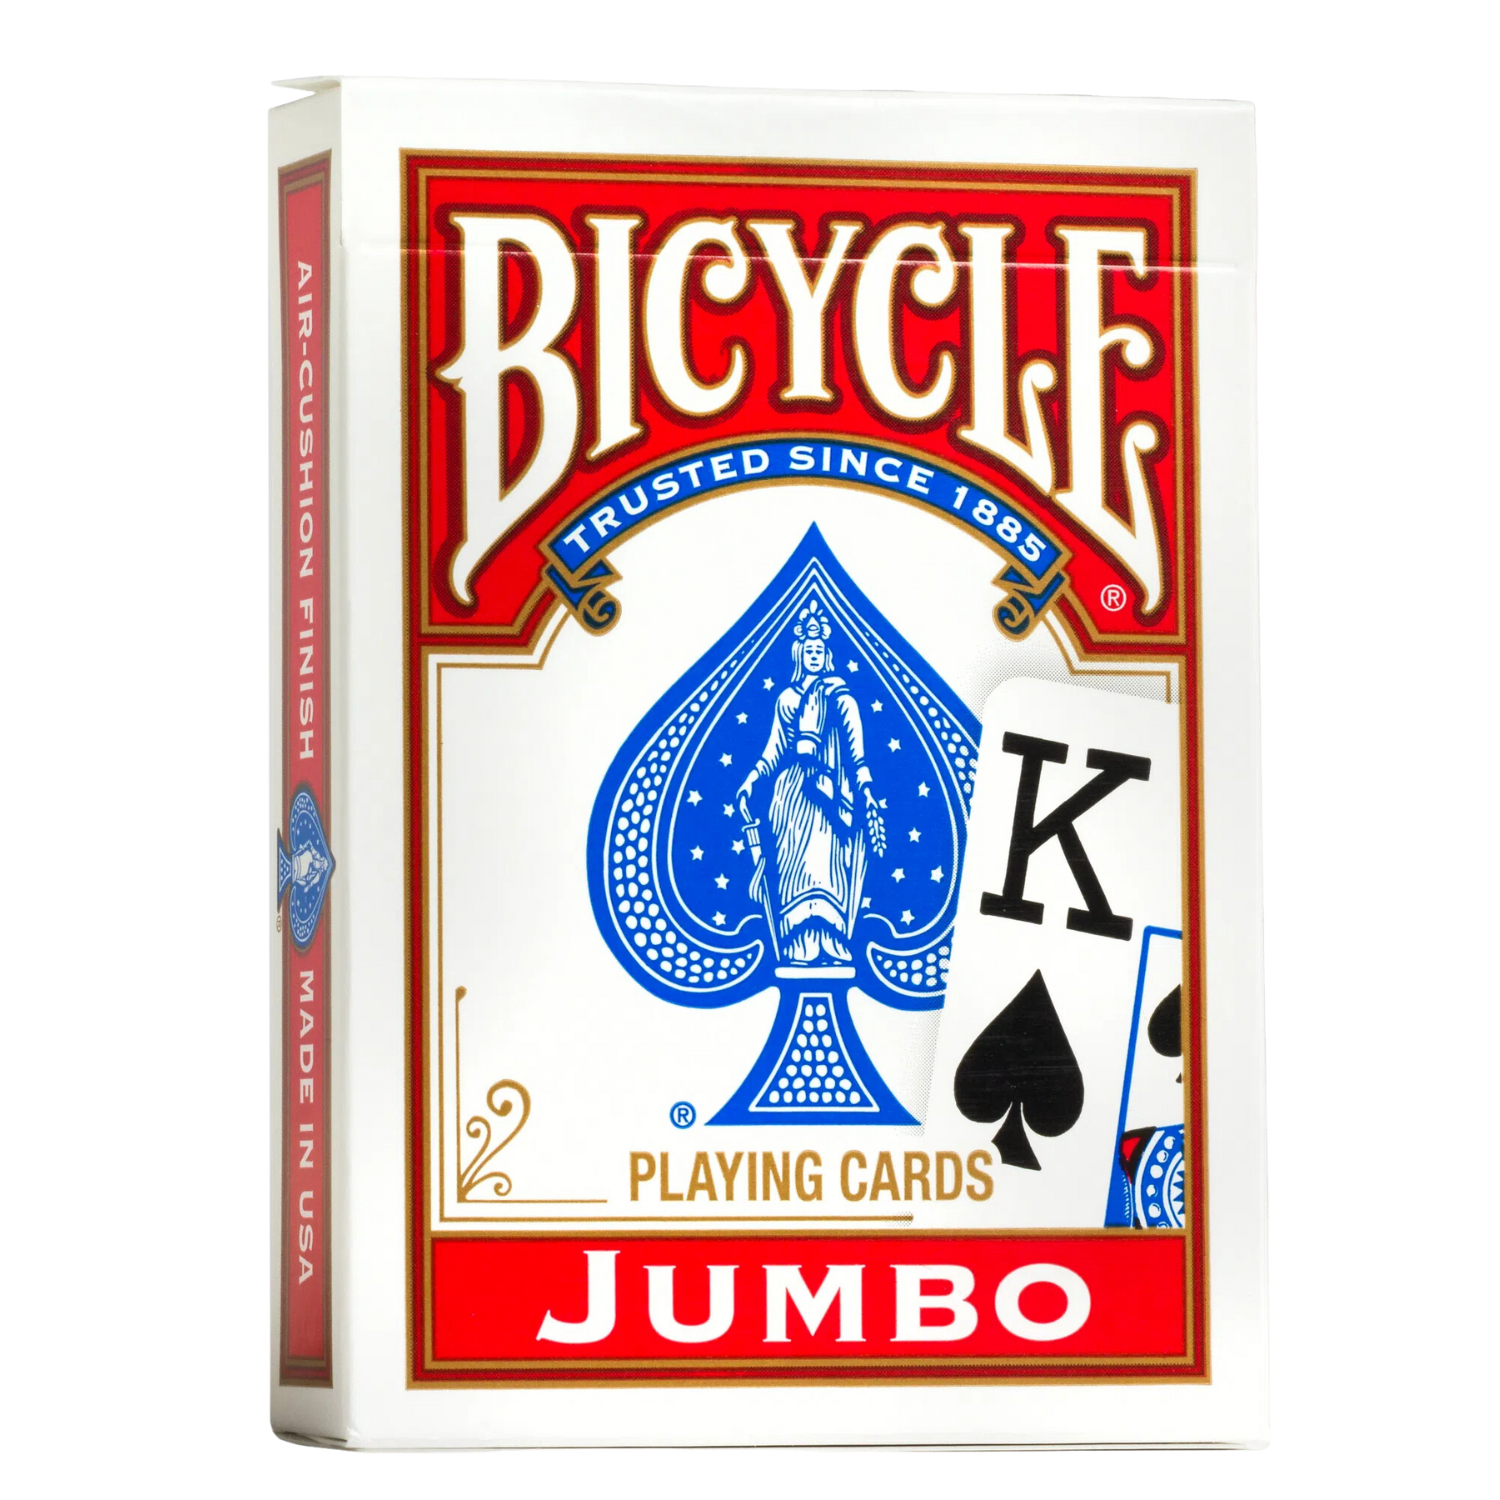 Image of a pack of Bicycle Jumbo large print poker index cards.